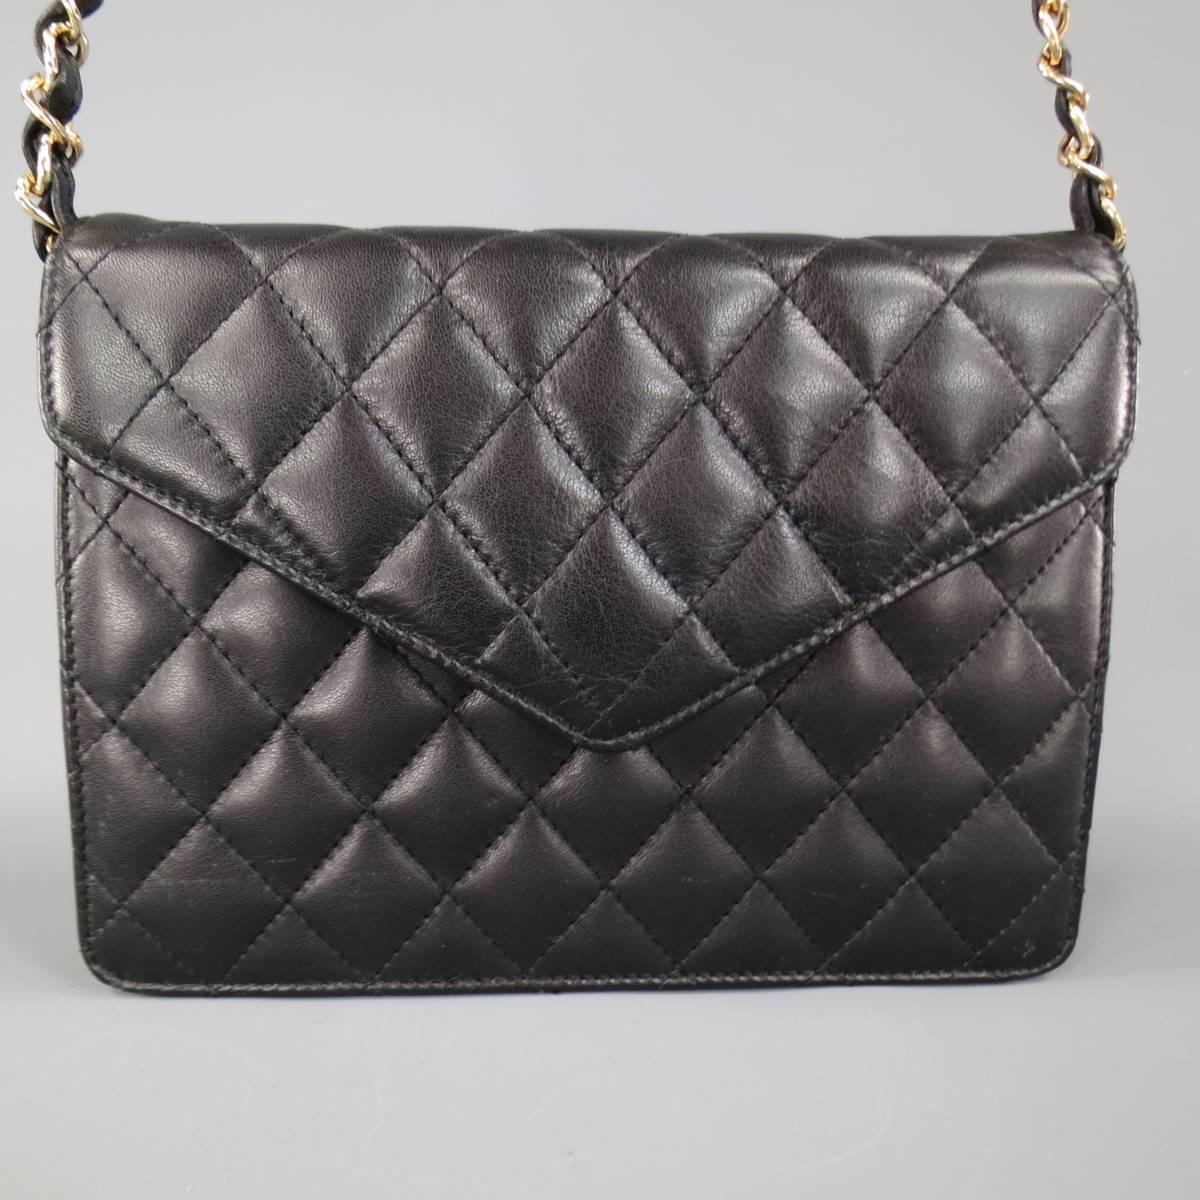 quilted leather bag with chain strap